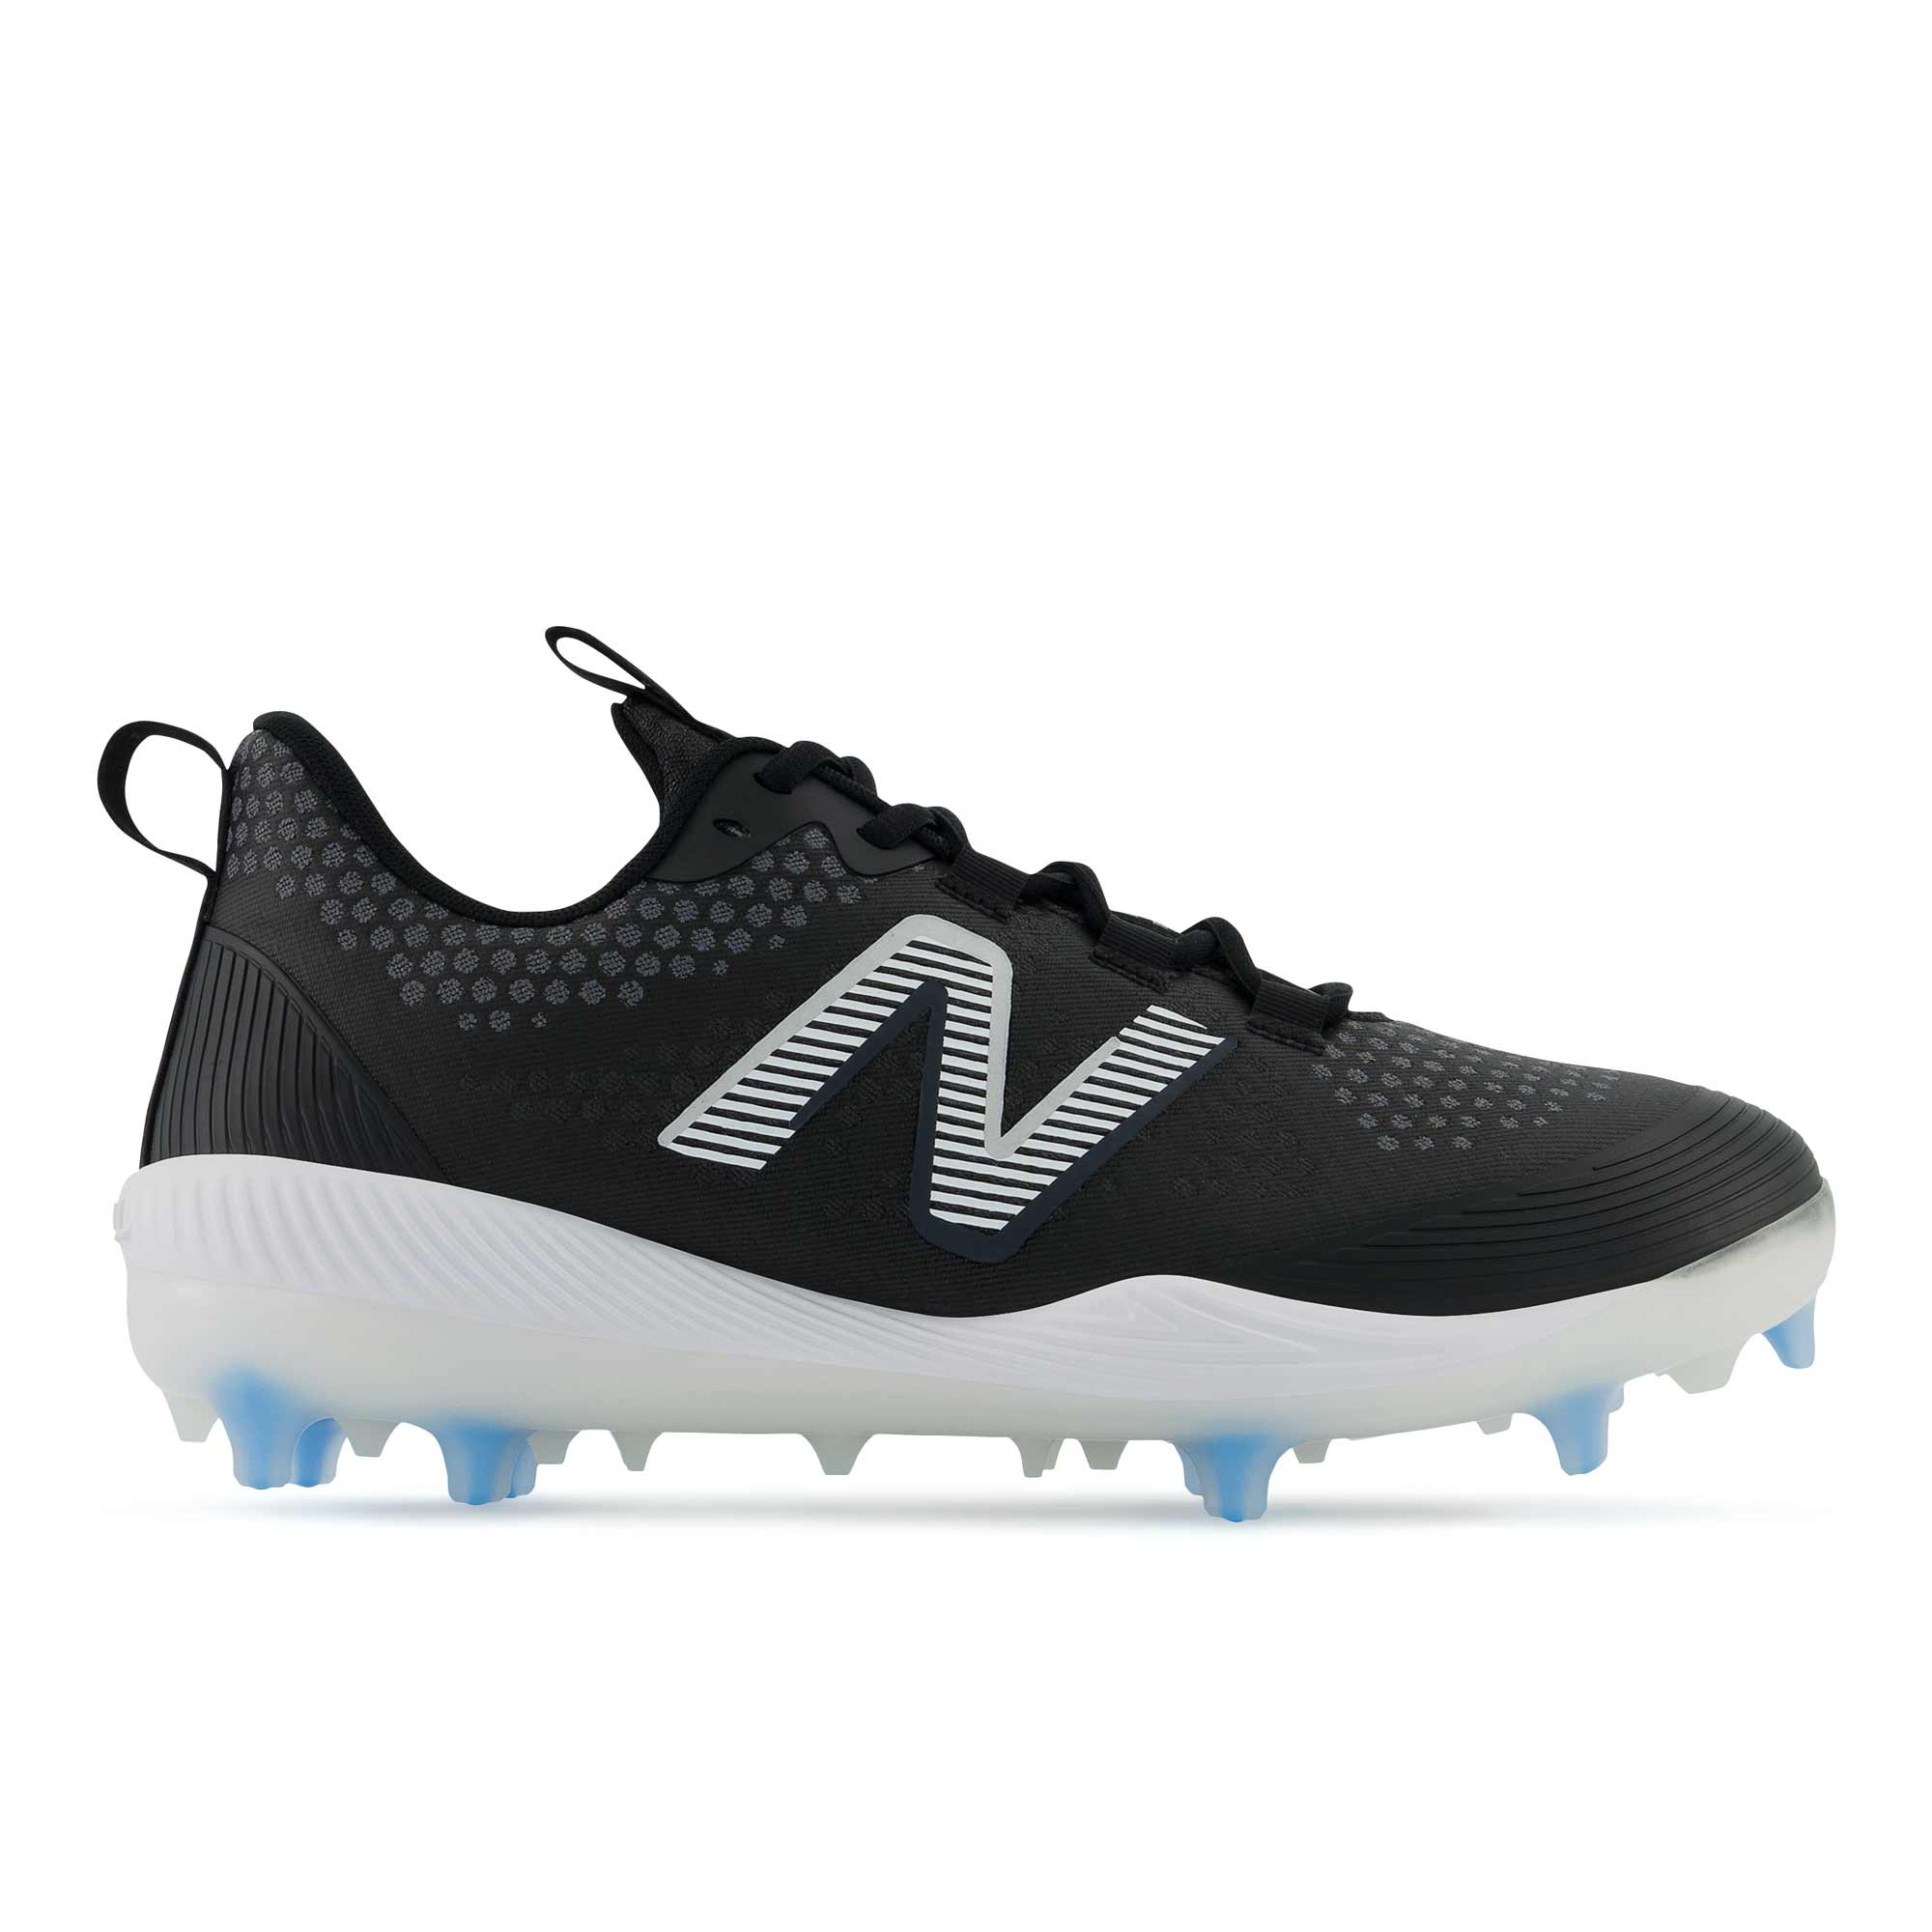 New Balance FuelCell LCOMPv3 Composite Molded Baseball Cleat